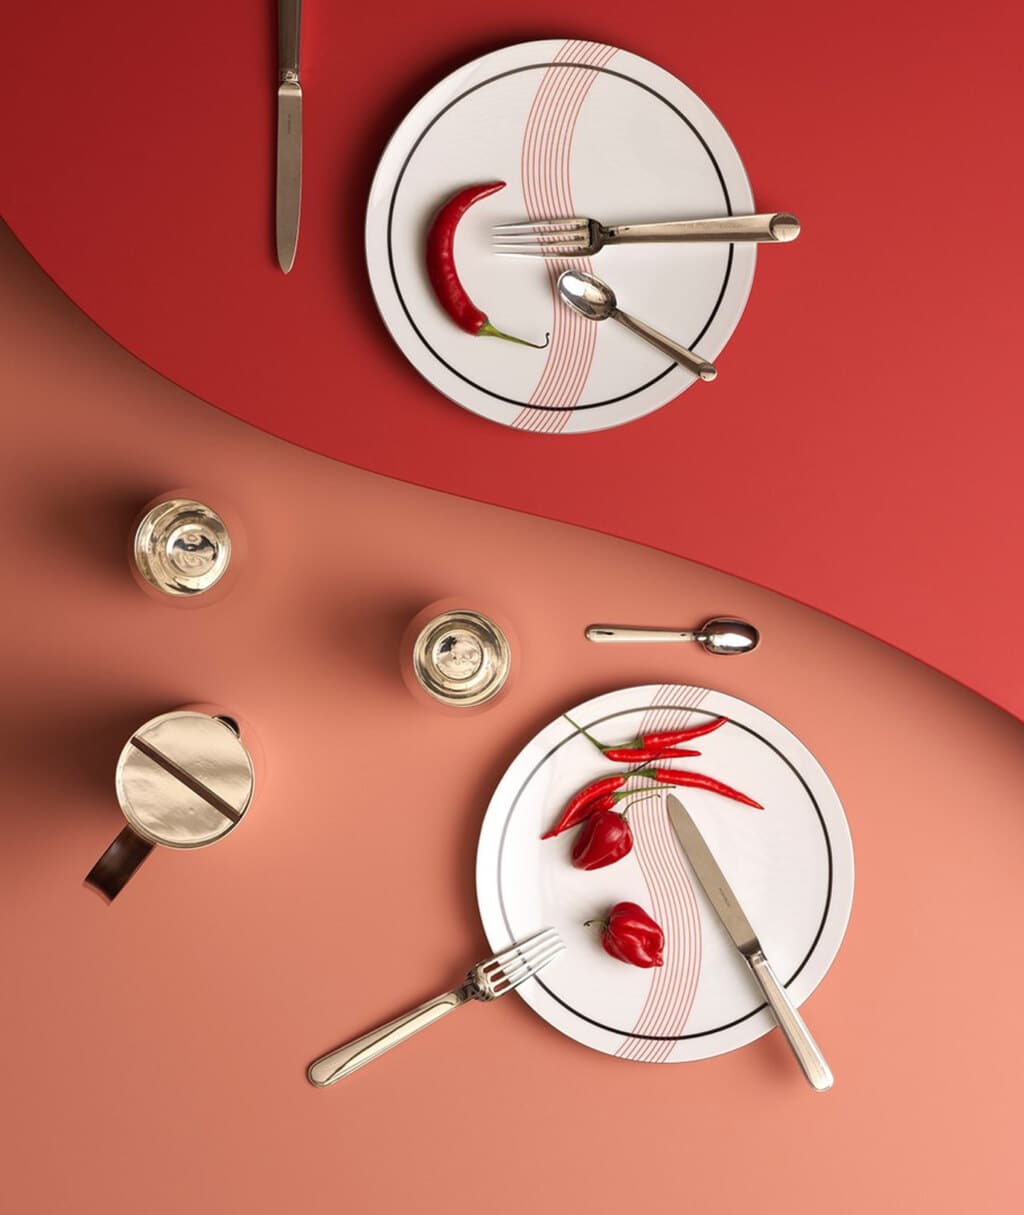 Porcelain plates from Initiales collection on a pink and red background, photographed with pieces of cutlery and table accessories from Phi collection